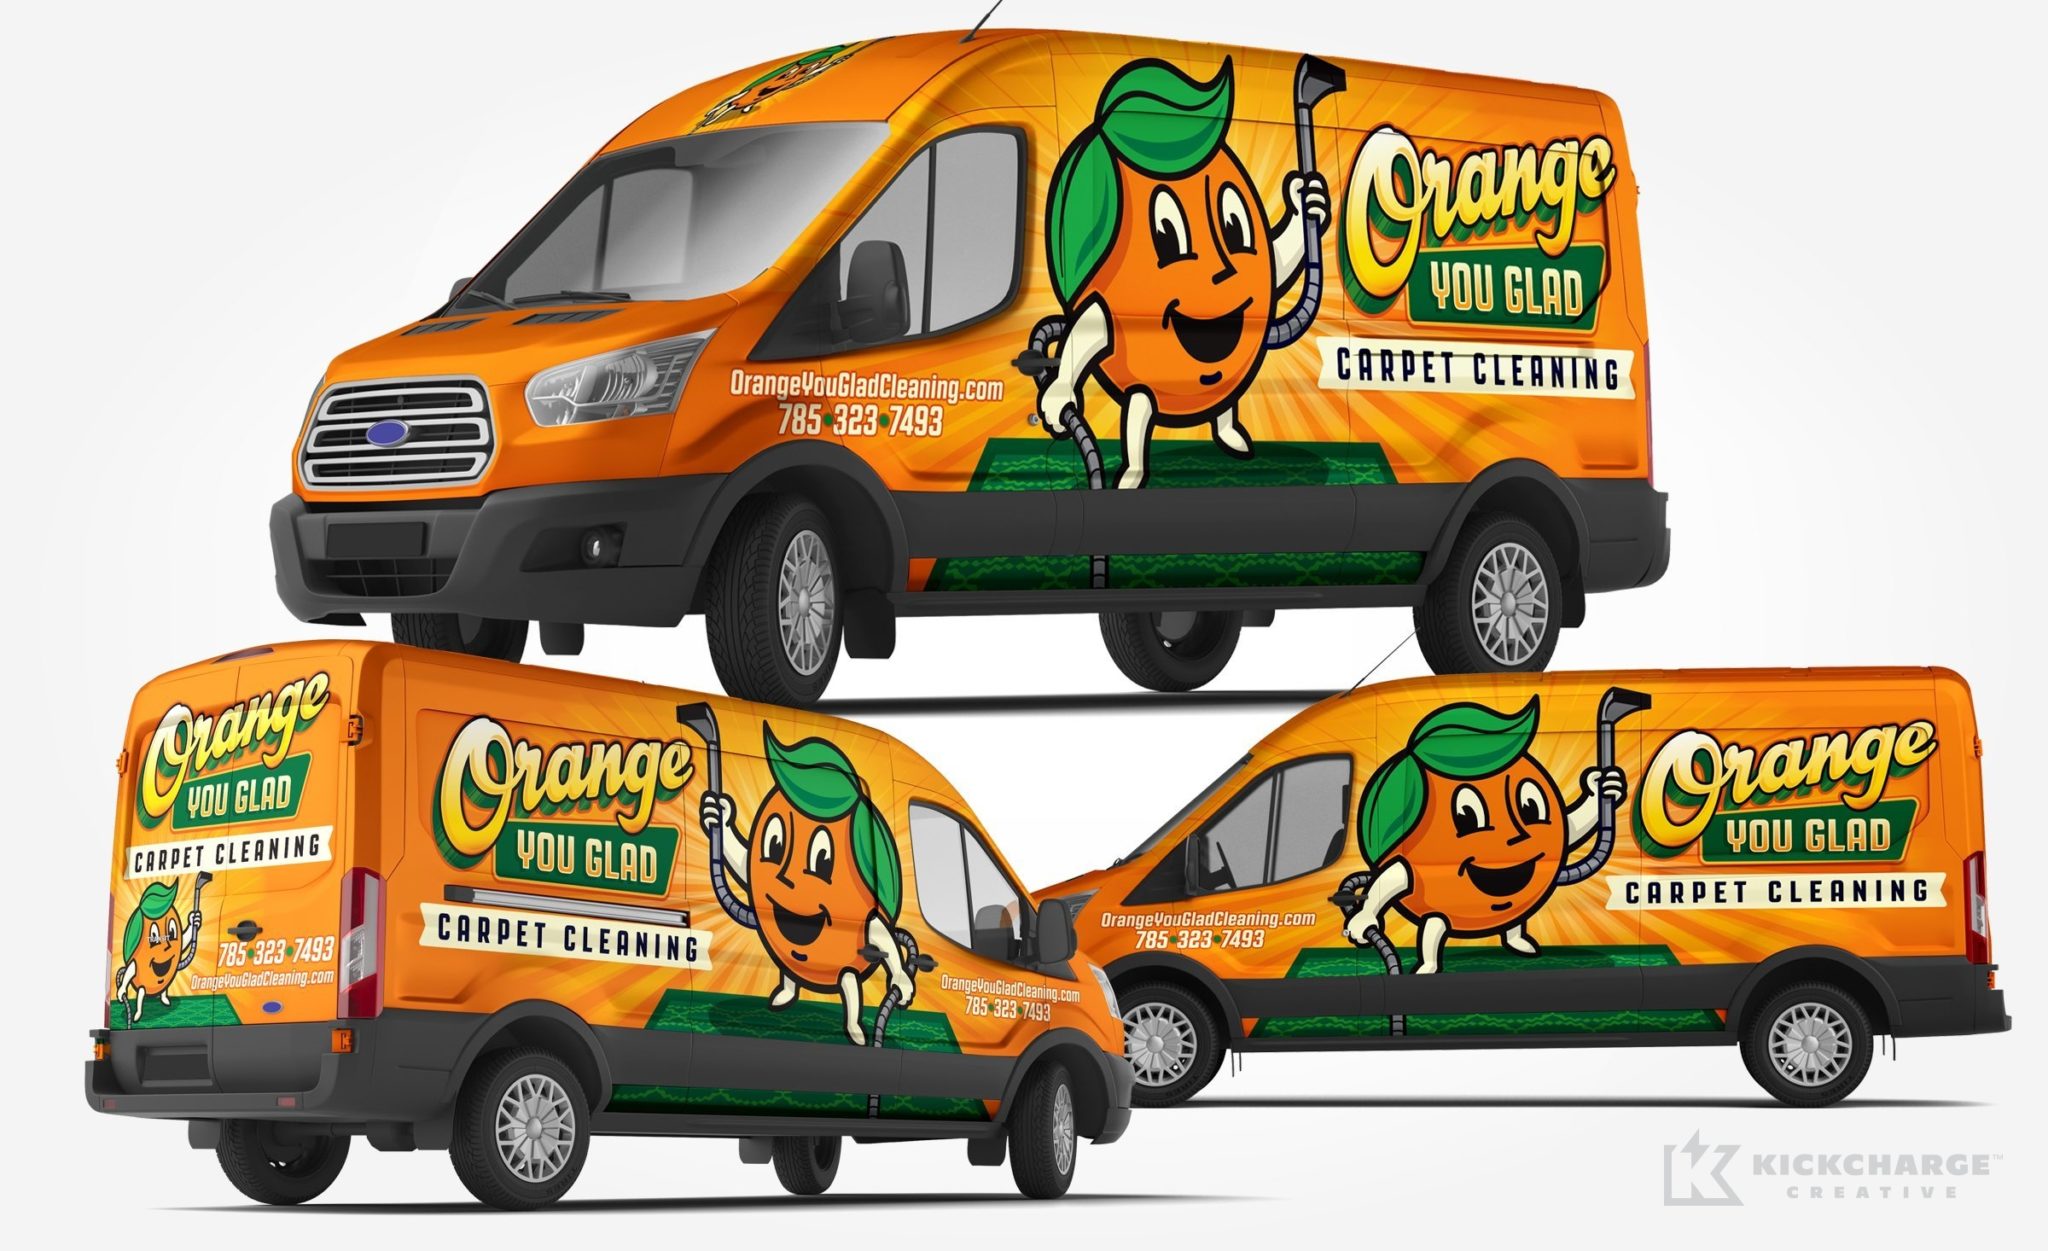 Something sweet is hitting the streets! This truck wrap for Orange You Glad Carpet Cleaning is sure to turn heads as it travels through Kansas.